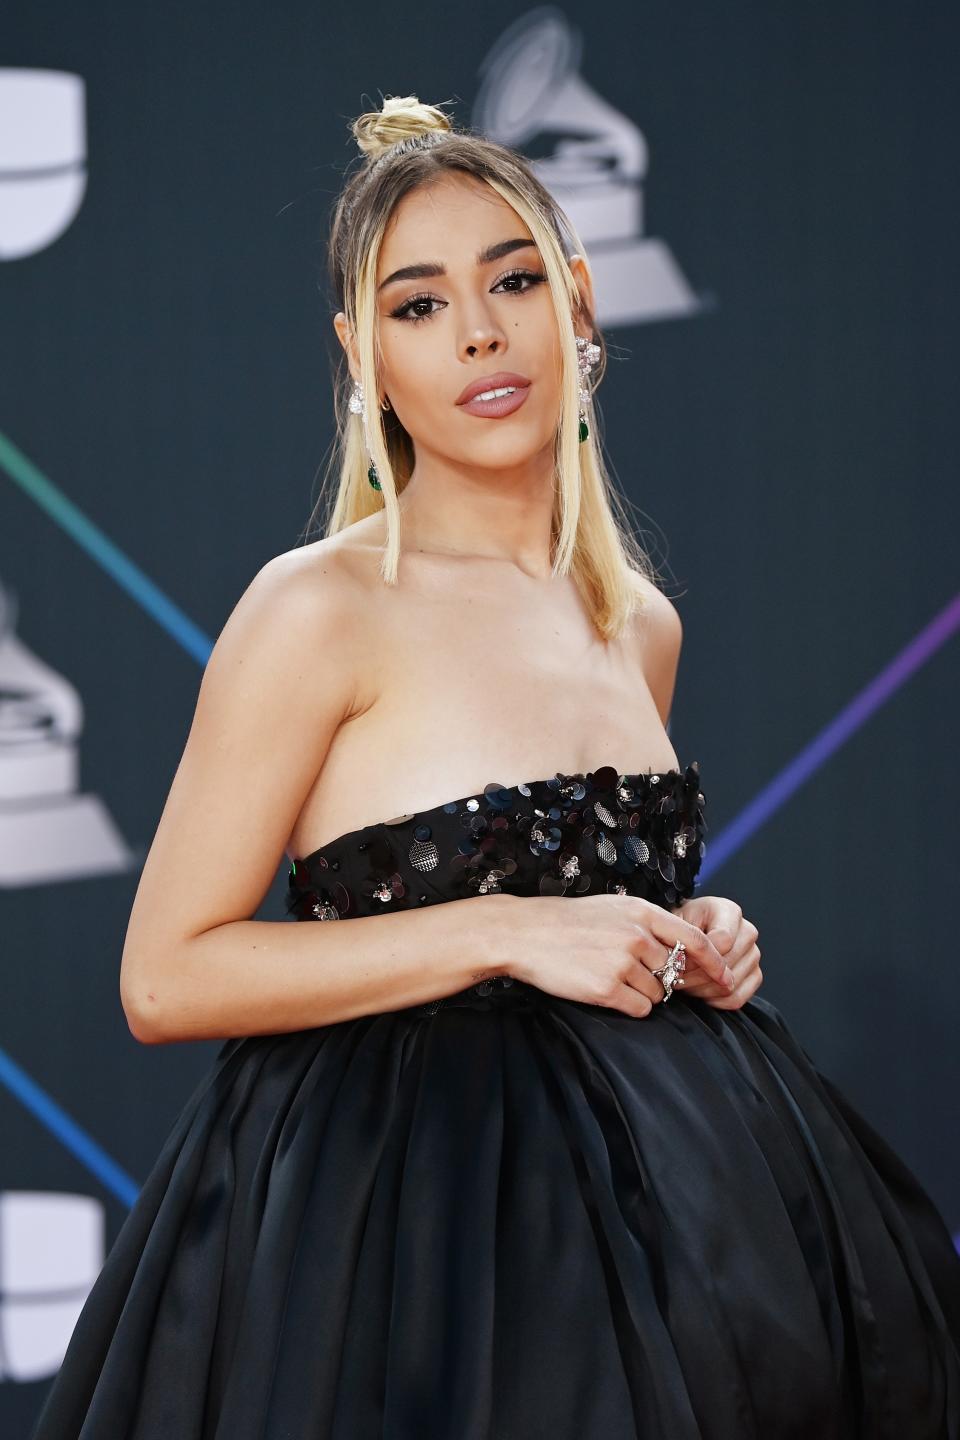 <h1 class="title">The 22nd Annual Latin GRAMMY Awards - Arrivals</h1><cite class="credit">Photo by Denise Truscello/Getty Images for The Latin Recording Academy.</cite>